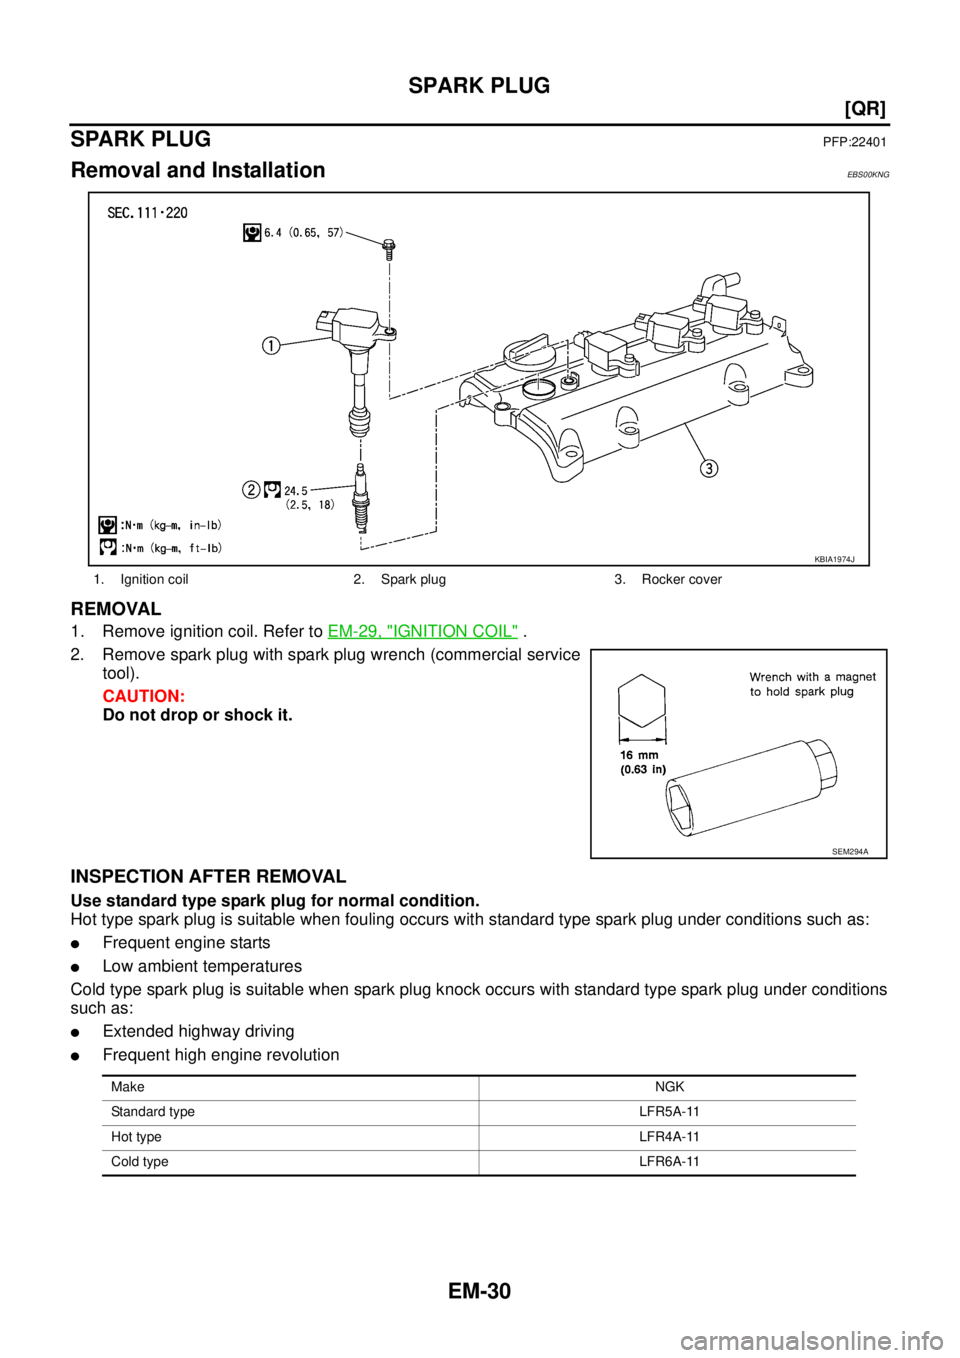 NISSAN X-TRAIL 2003  Service Repair Manual EM-30
[QR]
SPARK PLUG
 
SPARK PLUG PFP:22401
Removal and InstallationEBS00KNG
REMOVAL
1. Remove ignition coil. Refer to EM-29, "IGNITION COIL" .
2. Remove spark plug with spark plug wrench (commercial